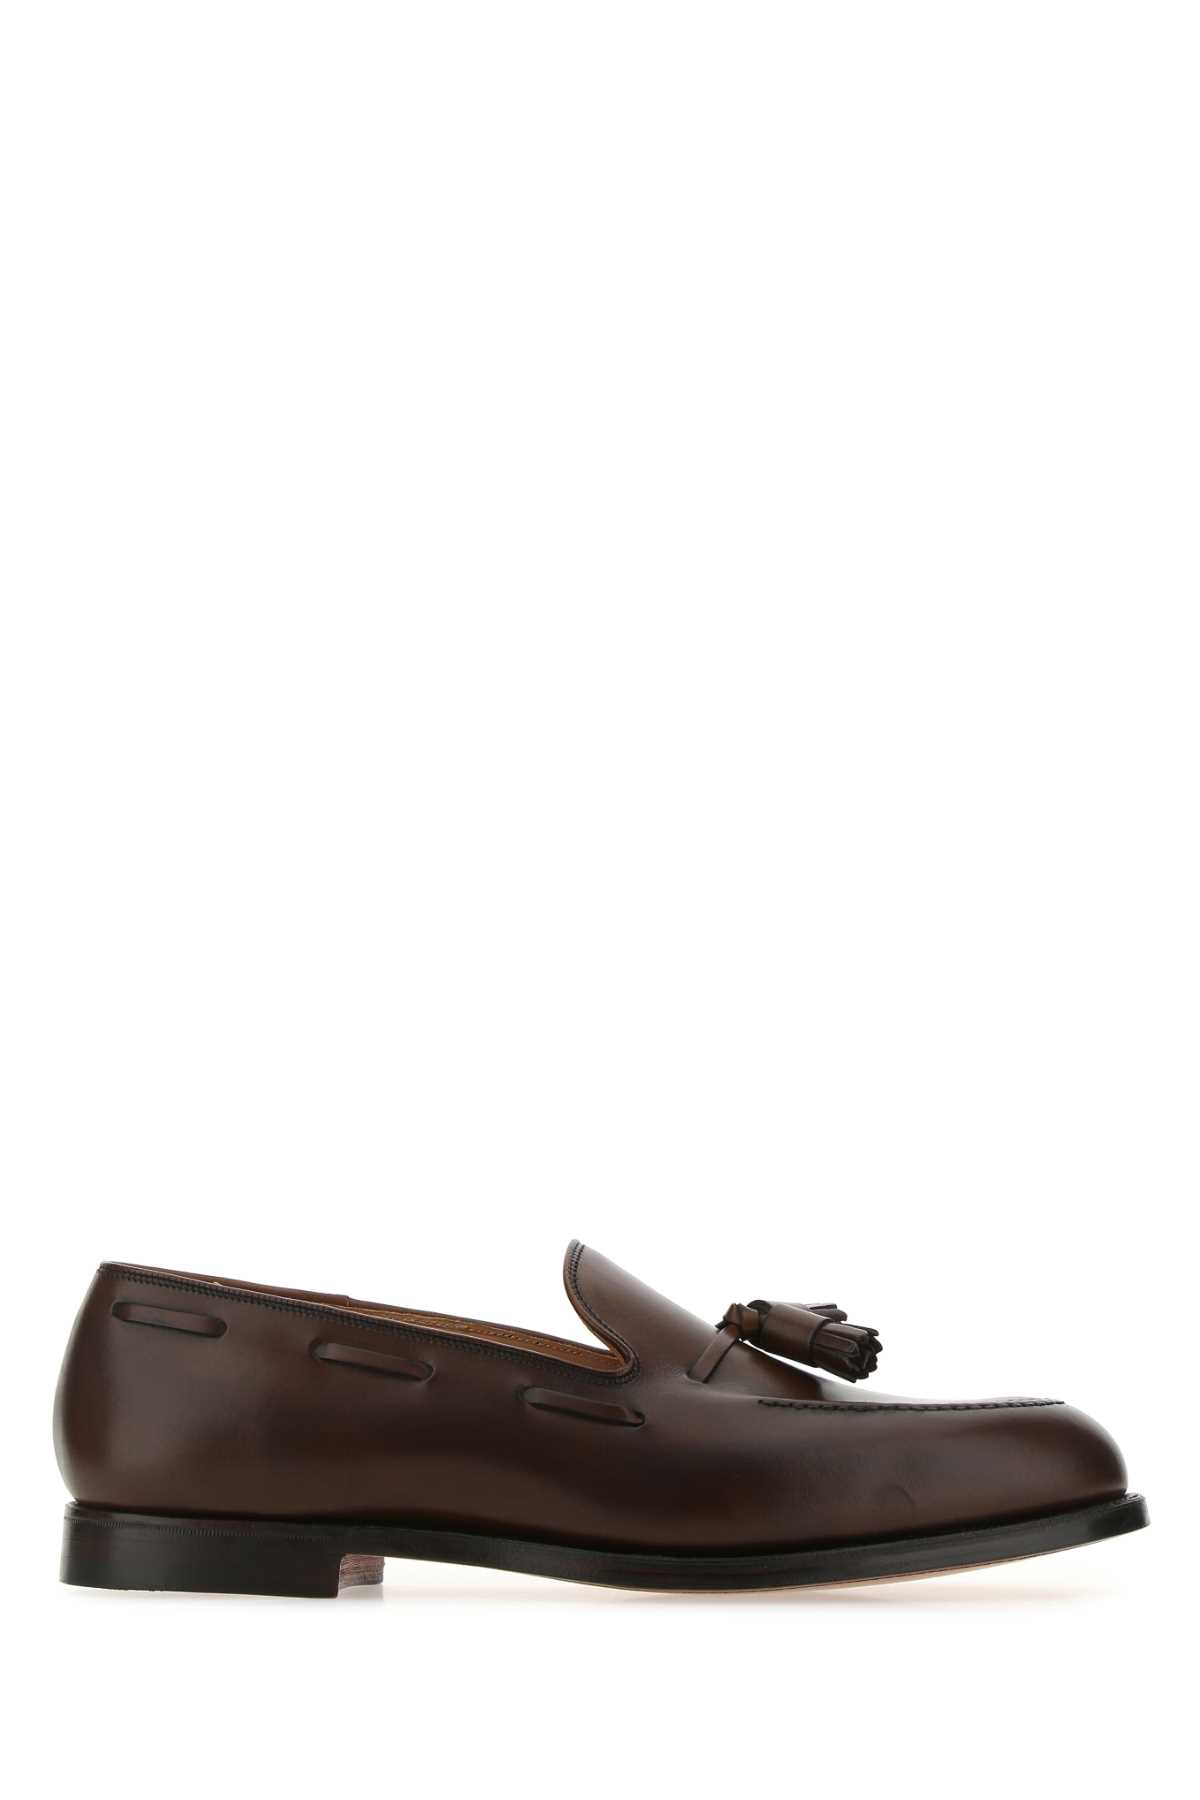 Chocolate Leather Cavendish 2 Loafers